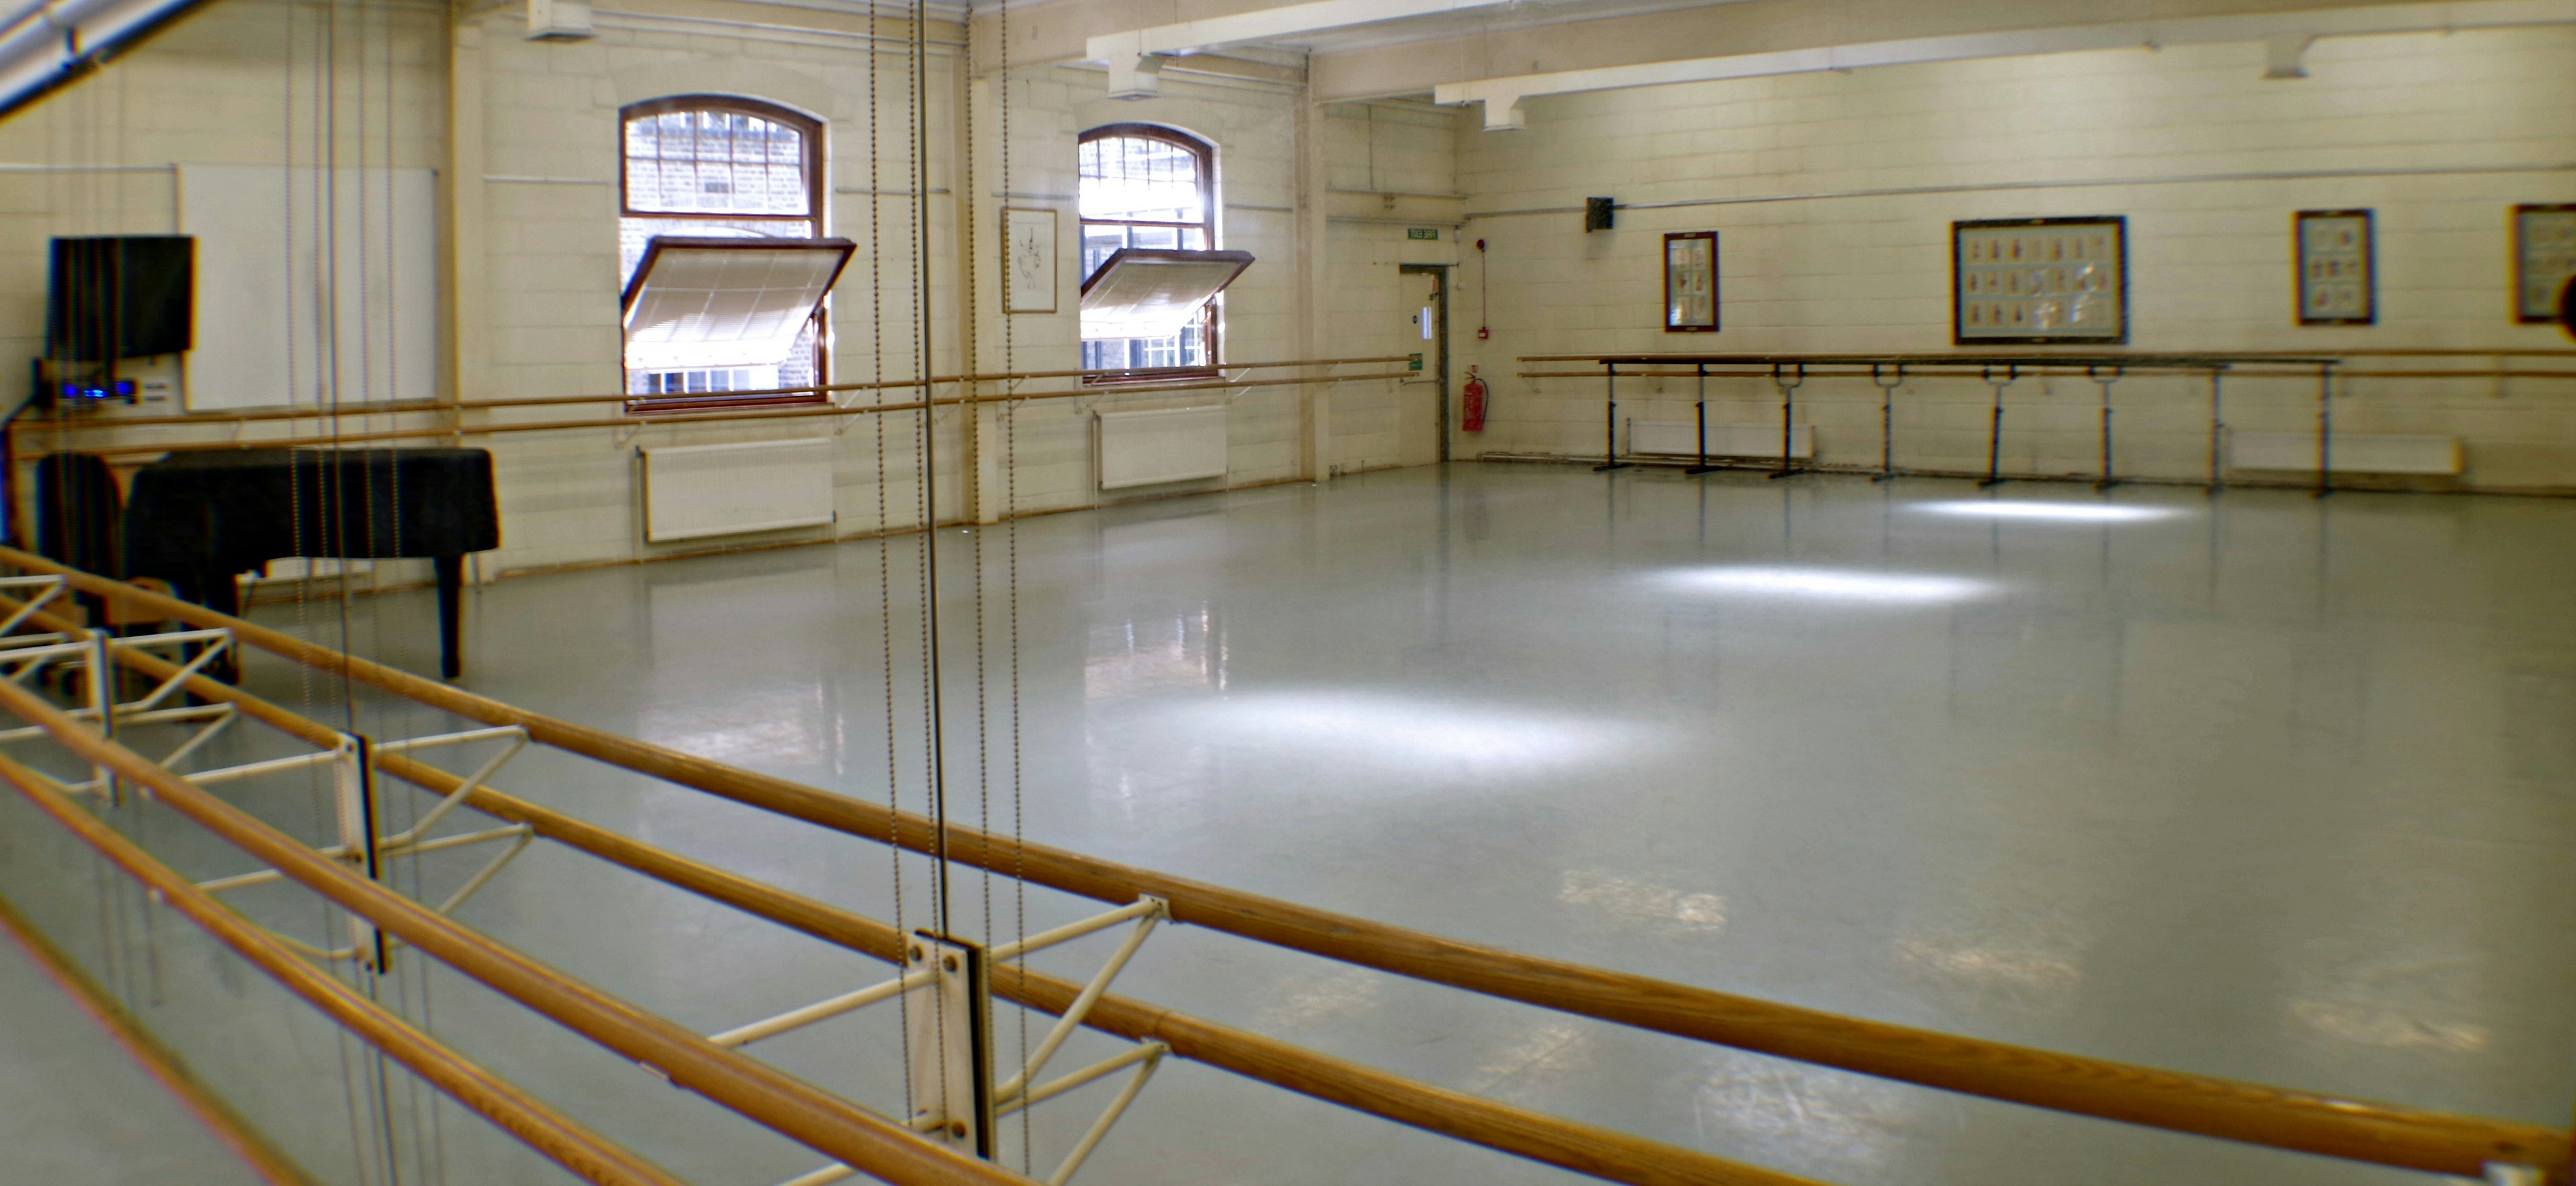 Performance Venues in London - Royal Academy of Dance